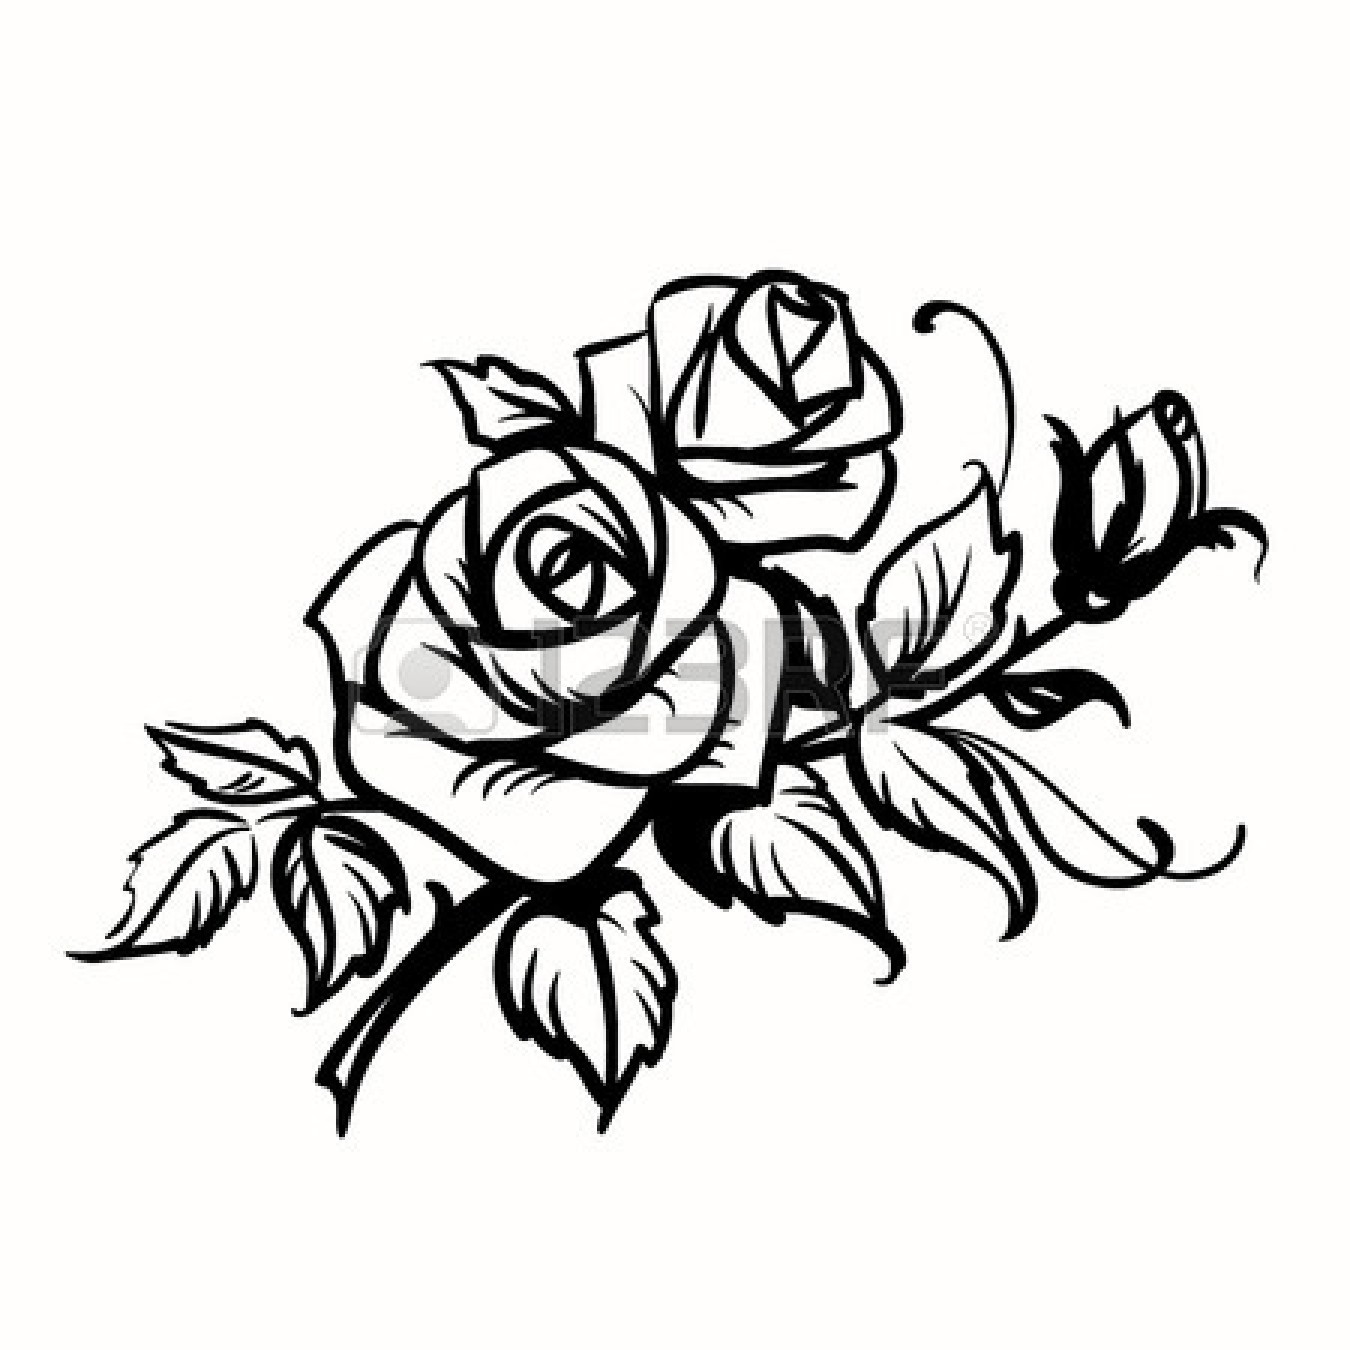 Free Rose Outlines, Download Free Clip Art, Free Clip Art on